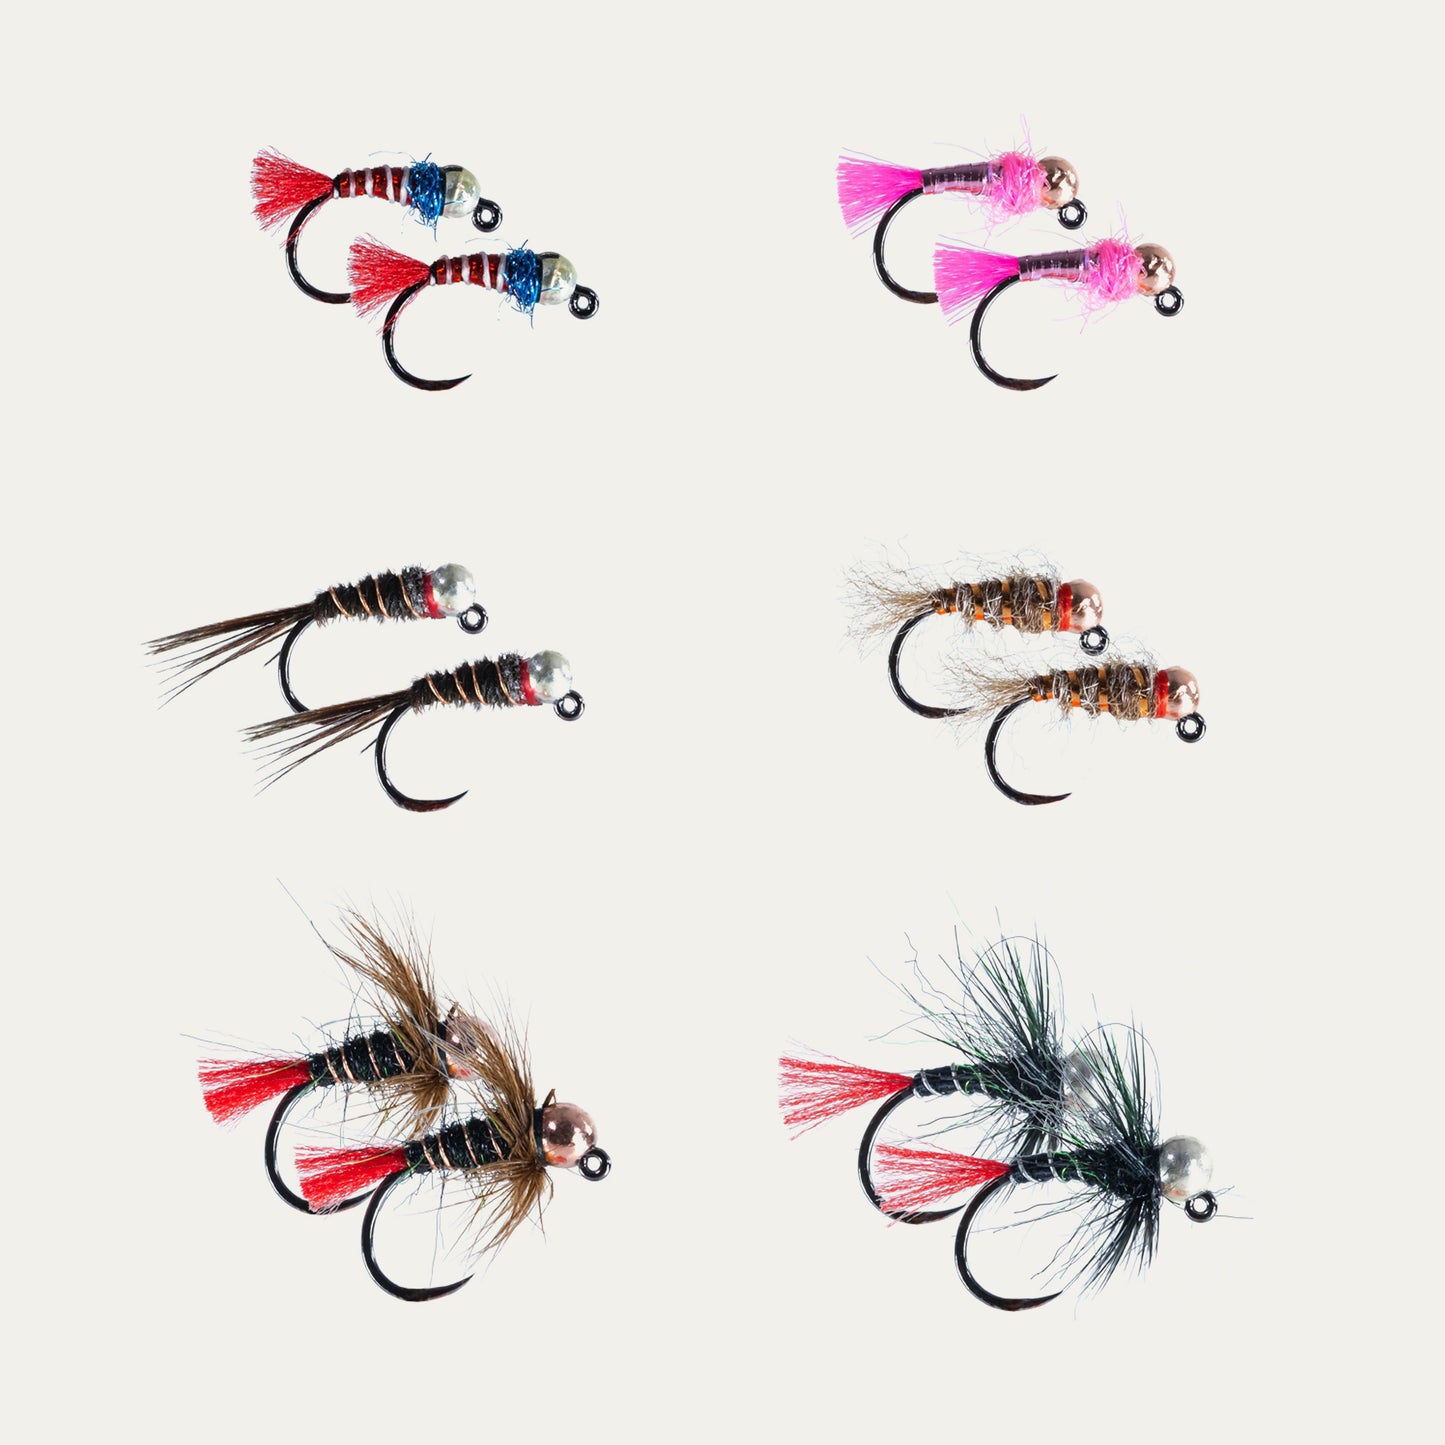 Euro Nymph Core Fly Assortment - 12pk, Barbless, Tungsten, Ahrex